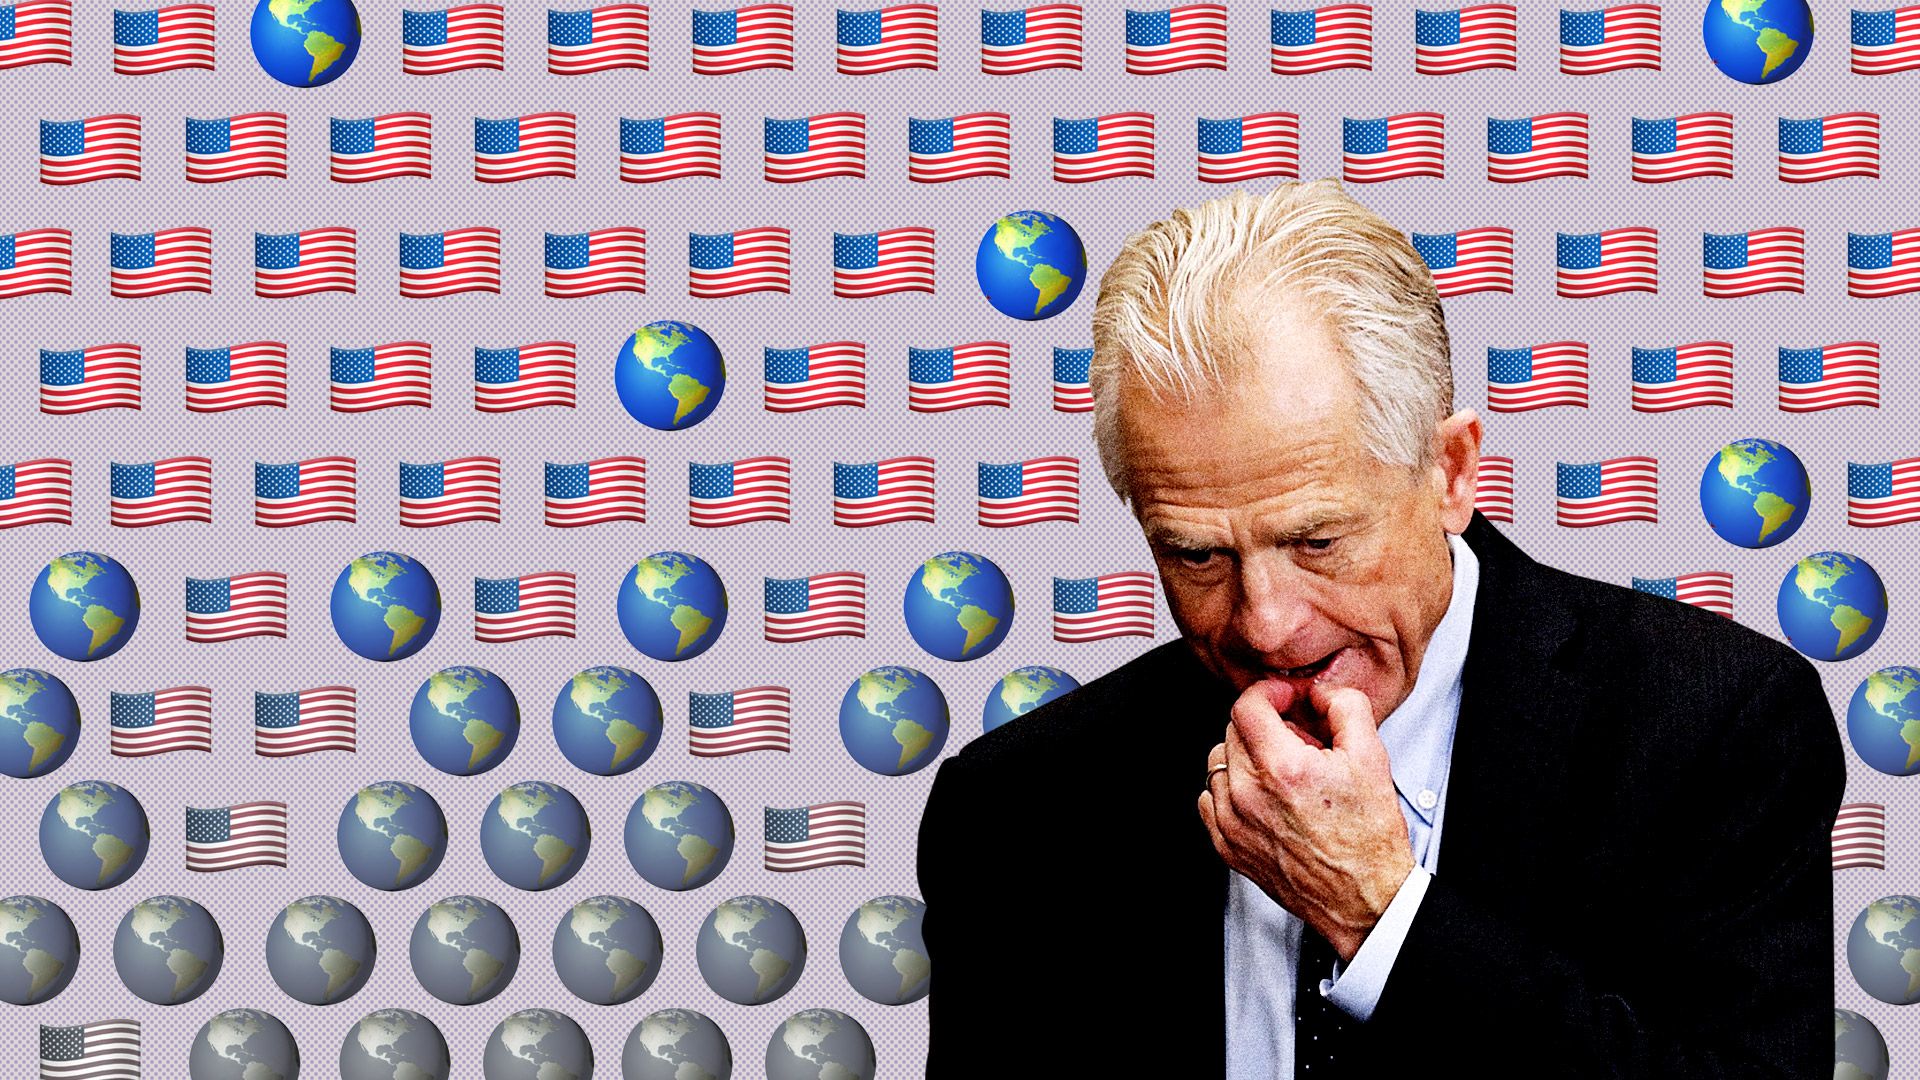 Peter Navarro against a backdrop of globes and American flags